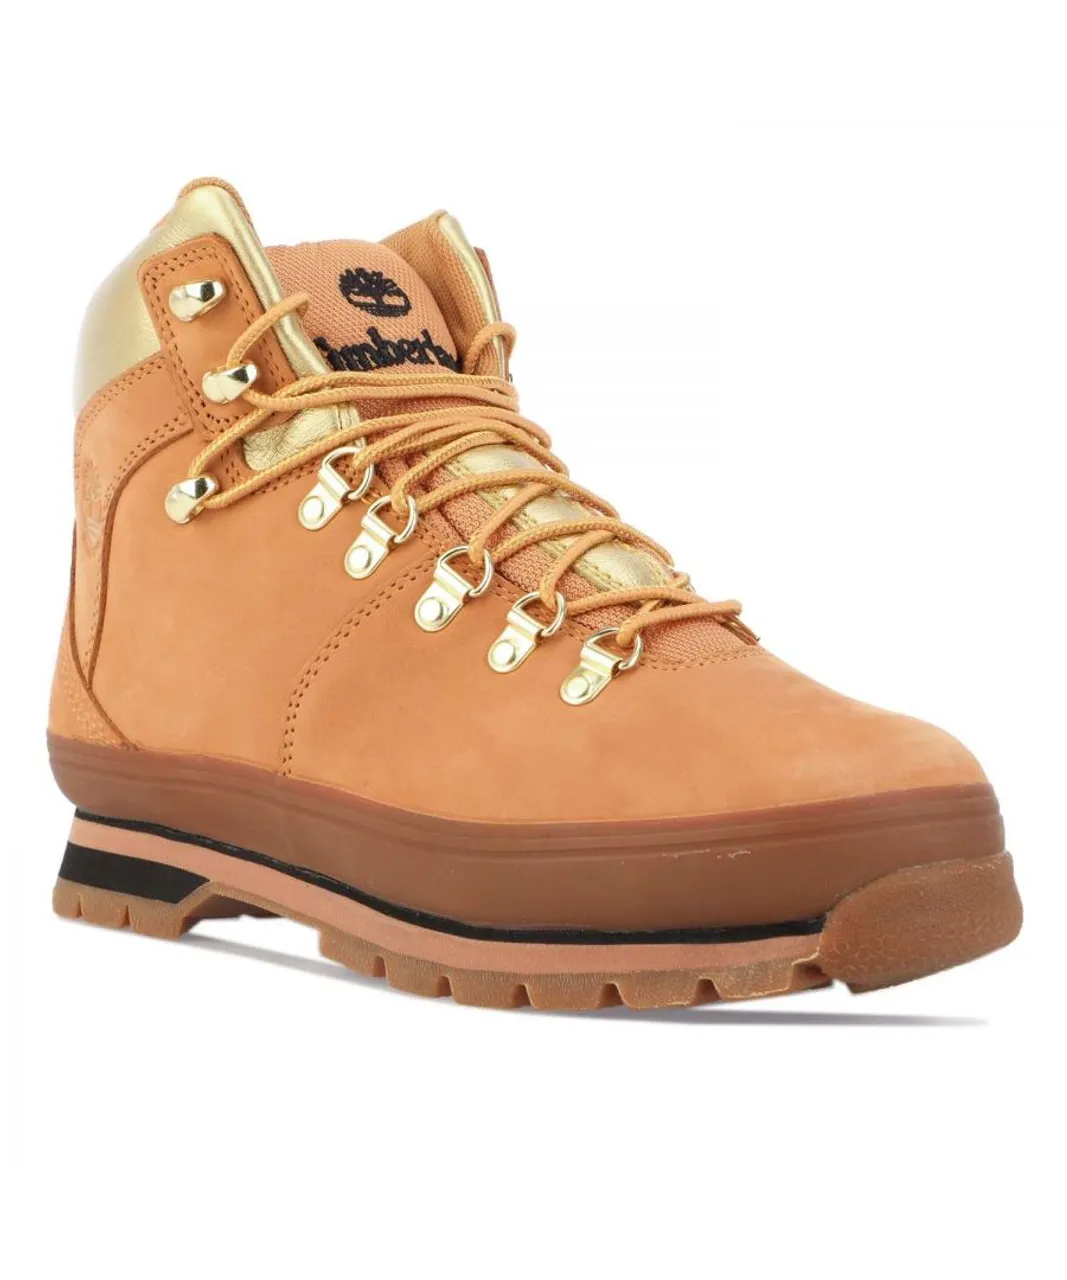 Timberland Womenss Euro Hiker Hiking Boots in Wheat - Natural Leather